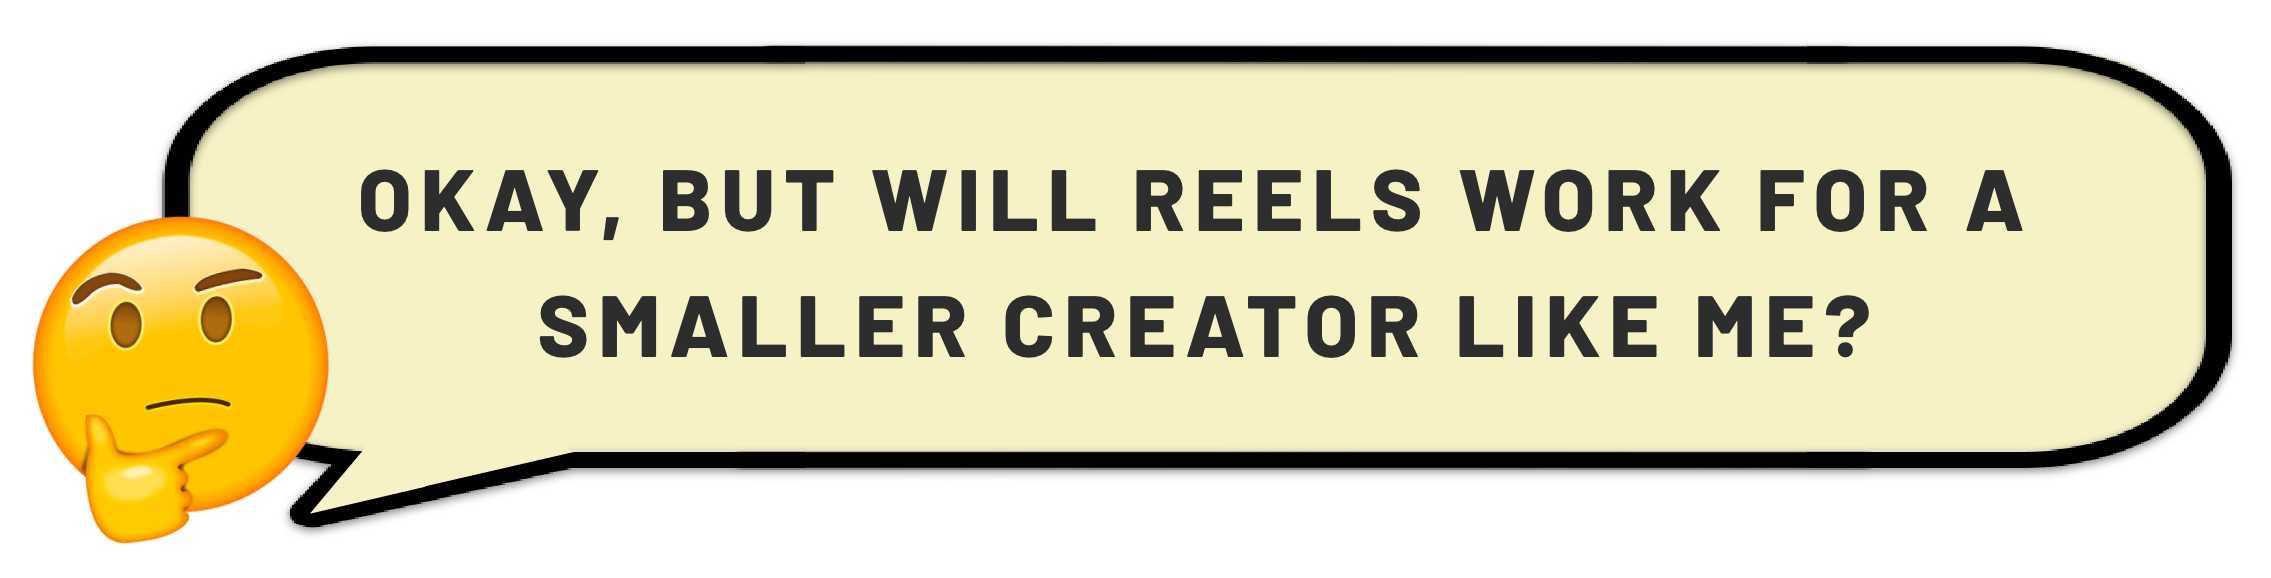 OKAY, BUT WILL REELS WORK FOR A  SMALLER CREATOR LIKE ME.png